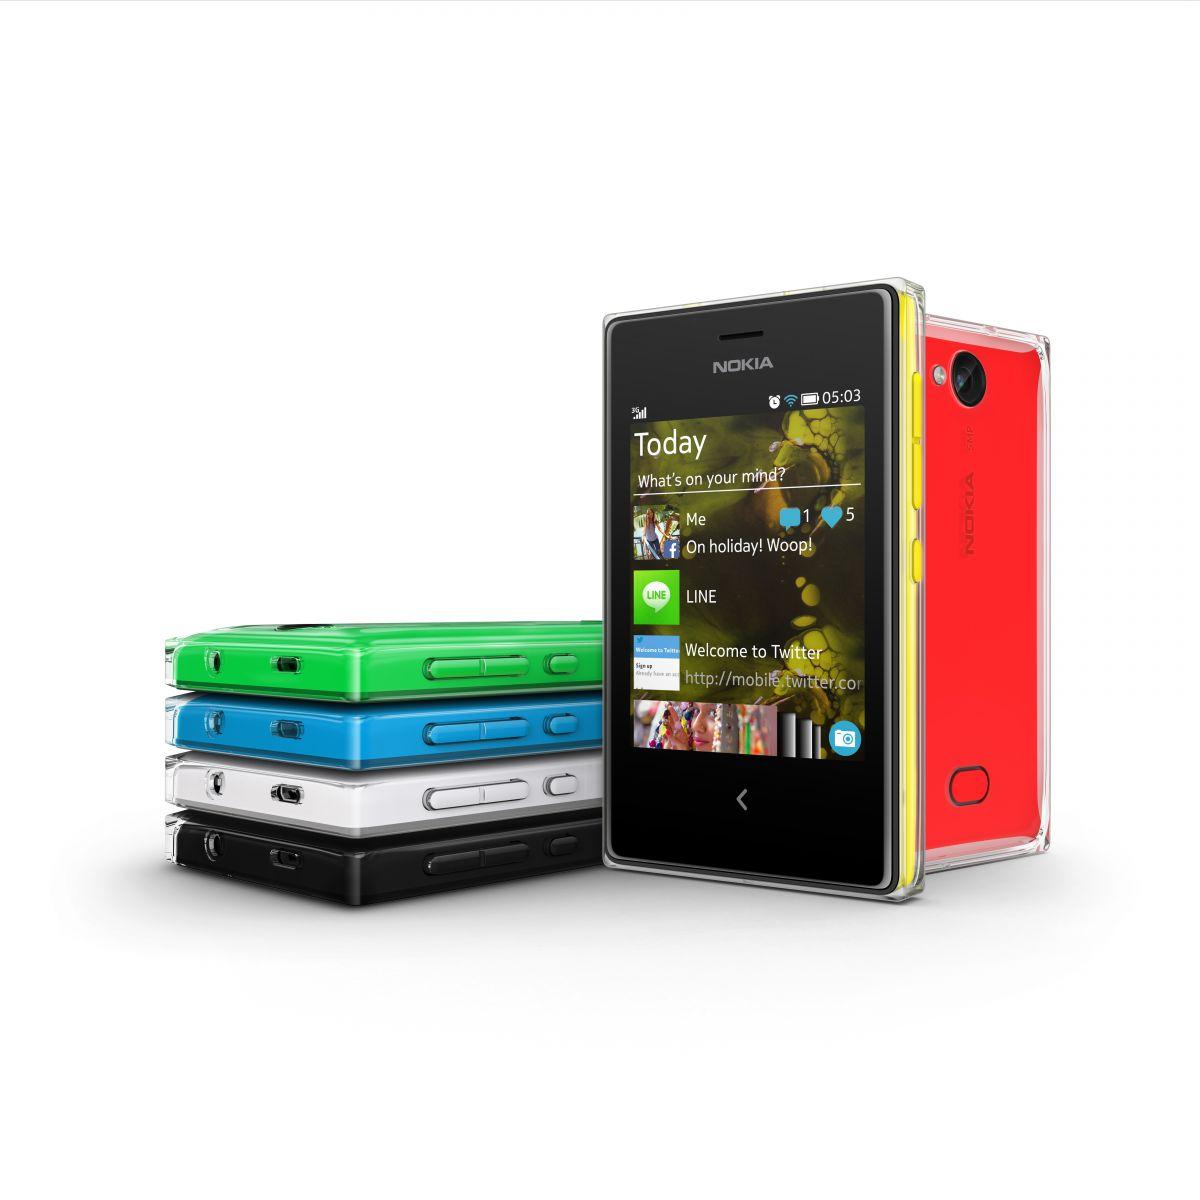 Press Release: Nokia Brings New Innovations To Design & Imaging With Six New Devices